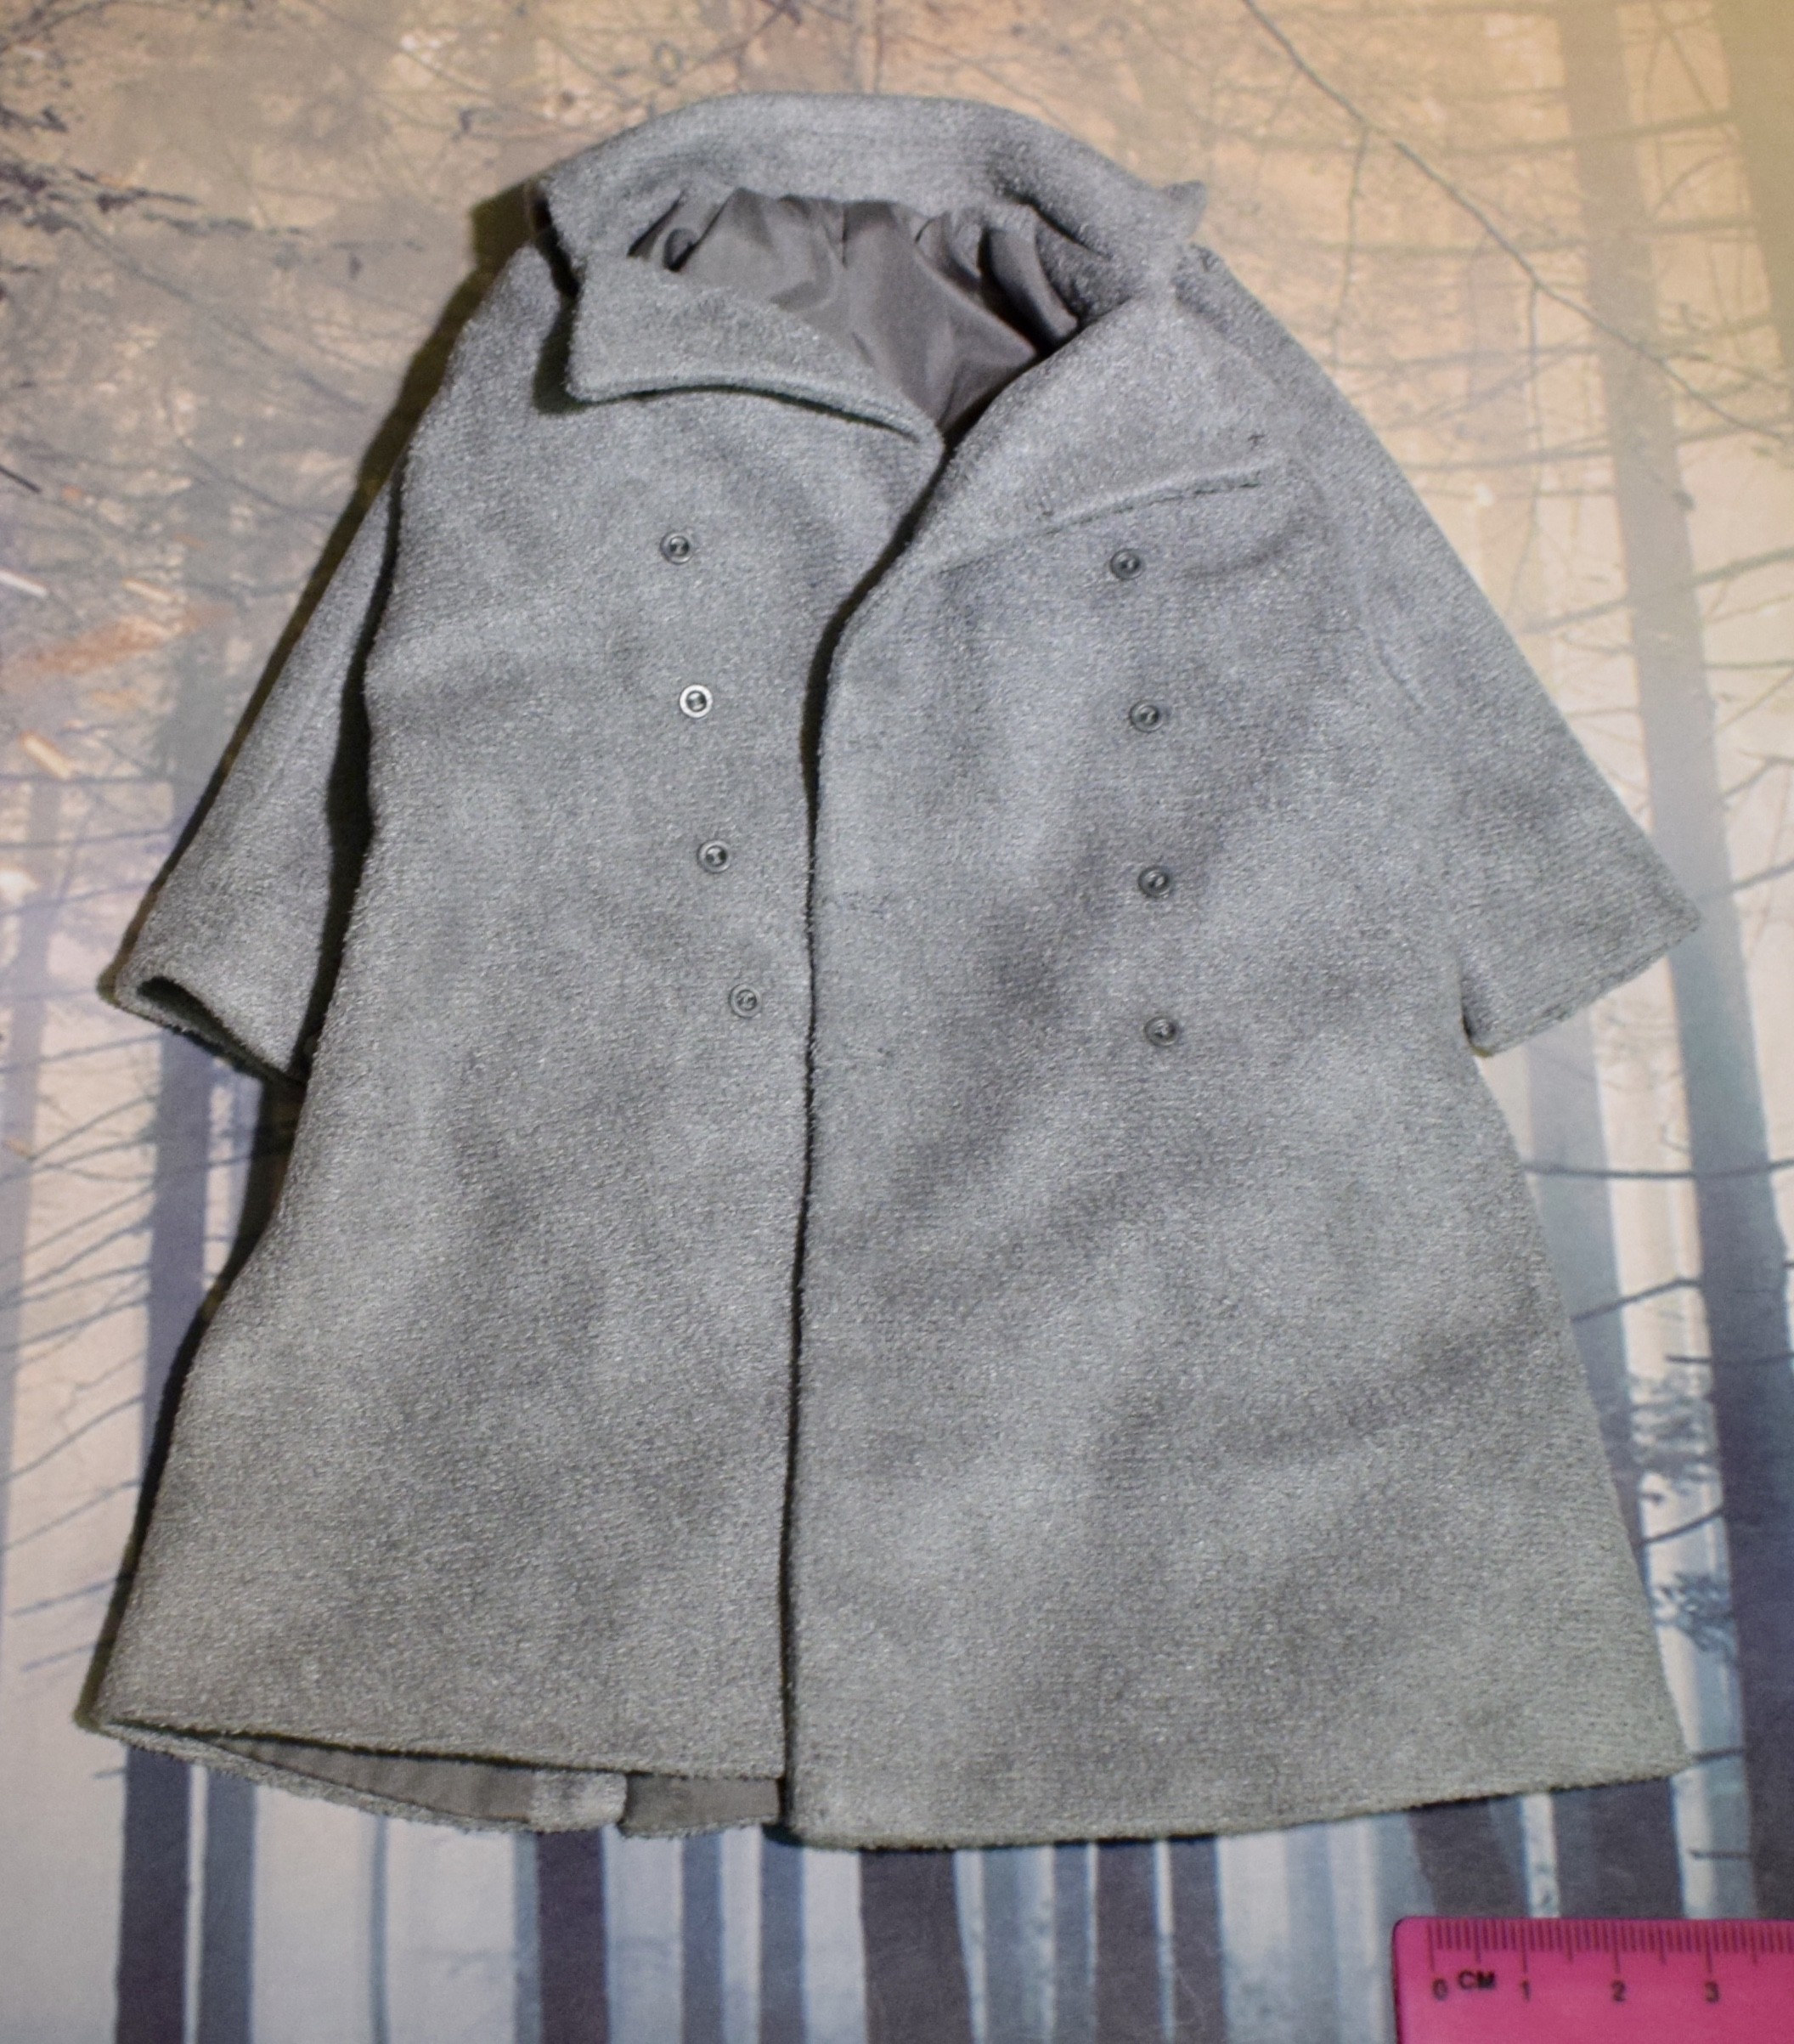 Dragon In Dreams DID 1/6 Scale Napoleonic French Greatcoat from Napoleon N80122